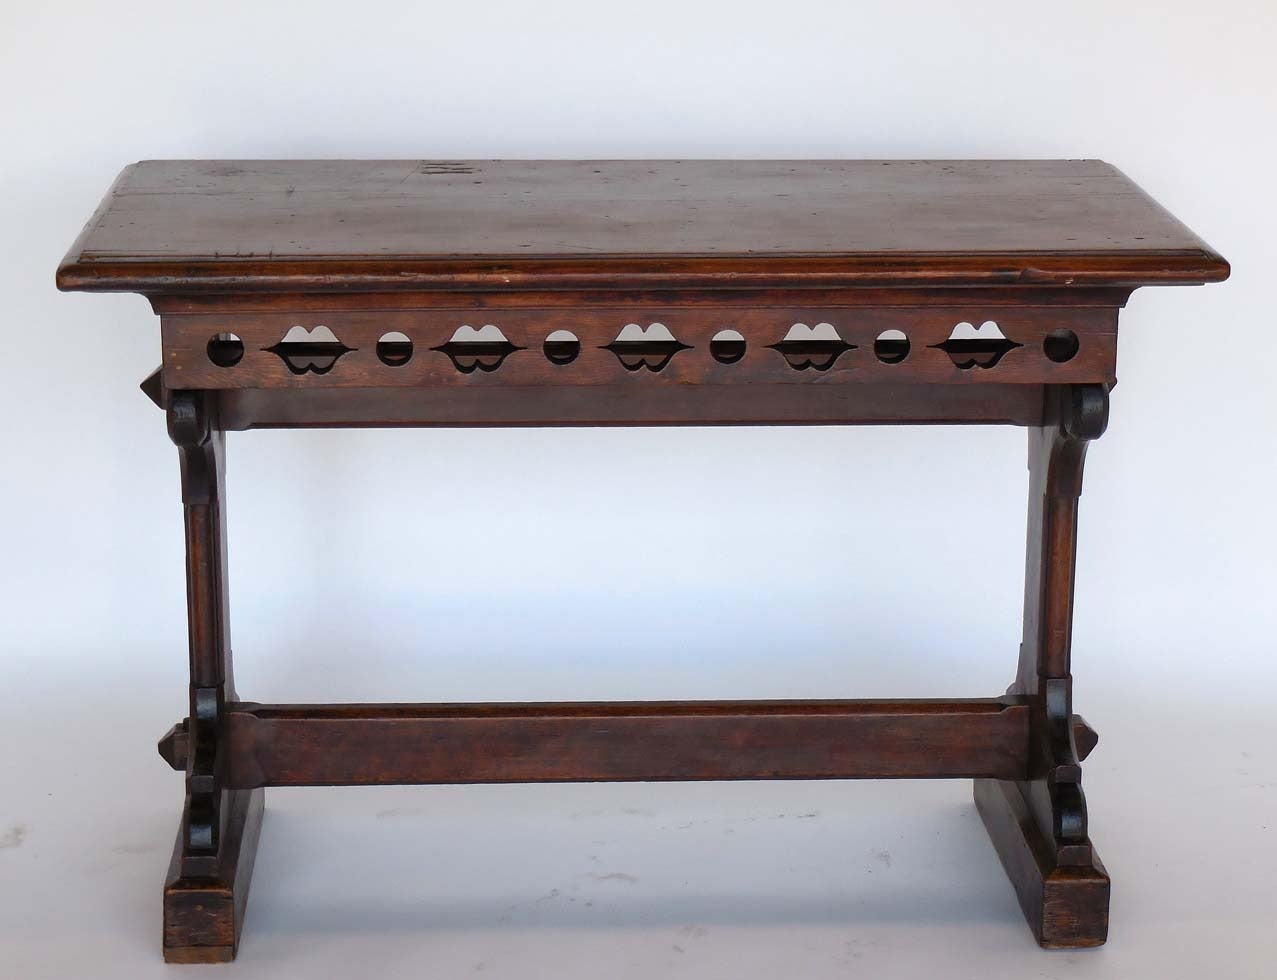 Fruitwood gothic revival altar table.  Late 19th century New England. Carving on both sides. Has the initials RF carved into the top.  Functional and sturdy with a nice patina.